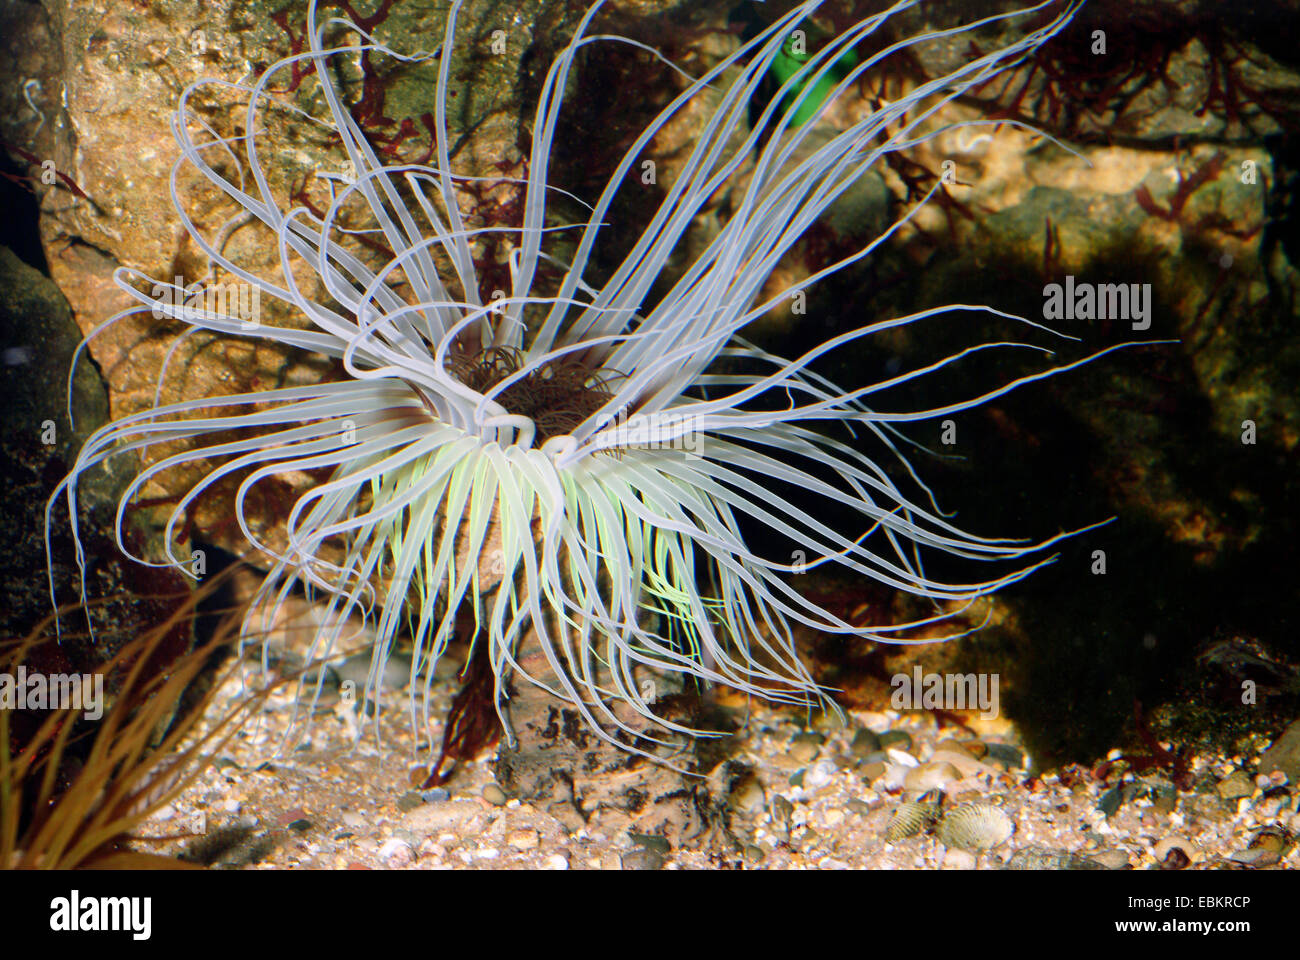 Cerianthid (Cerianthus spec.), with long white tentacles Stock Photo